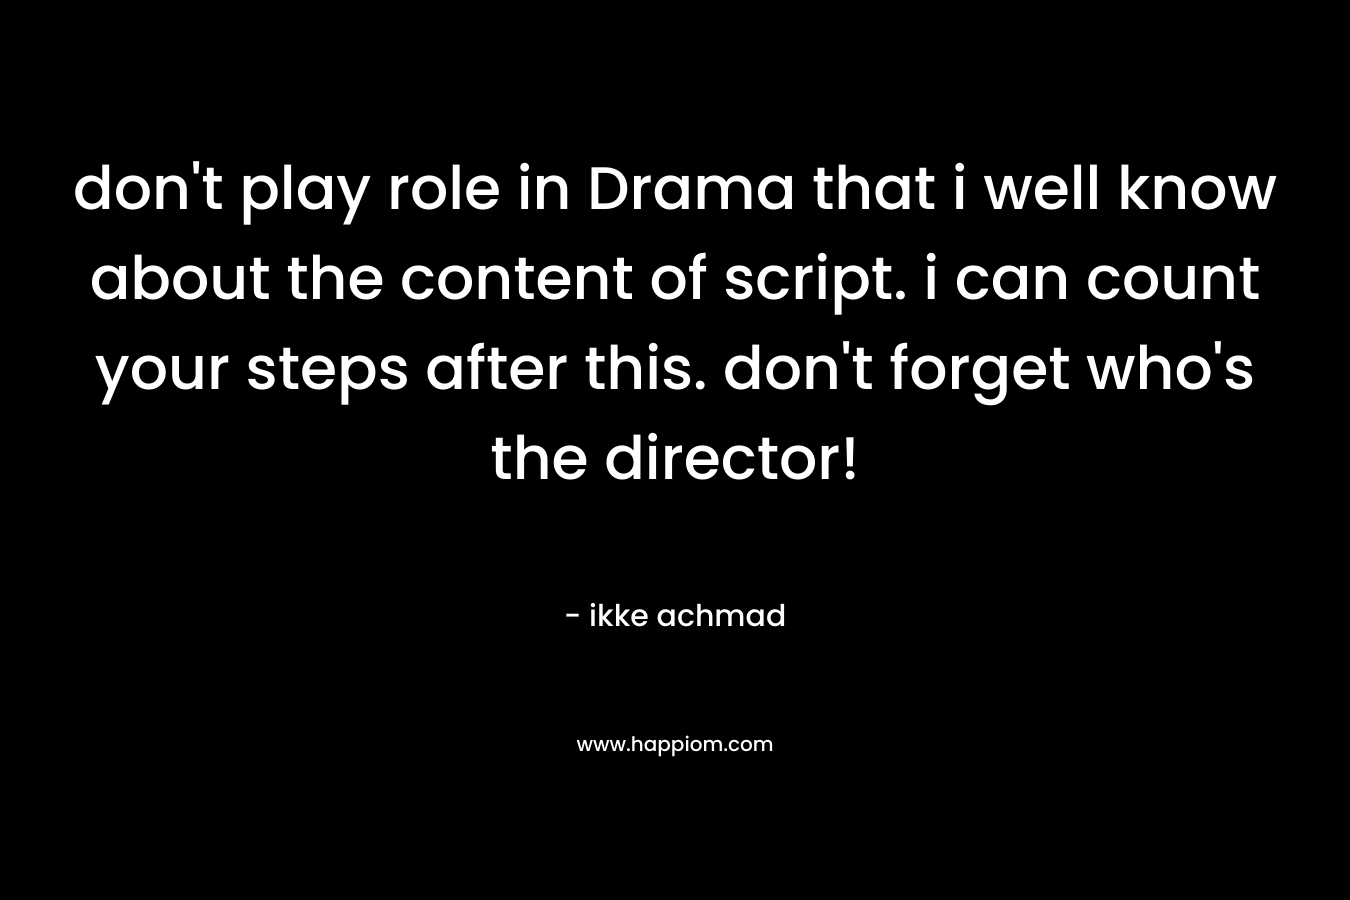 don’t play role in Drama that i well know about the content of script. i can count your steps after this. don’t forget who’s the director! – ikke achmad